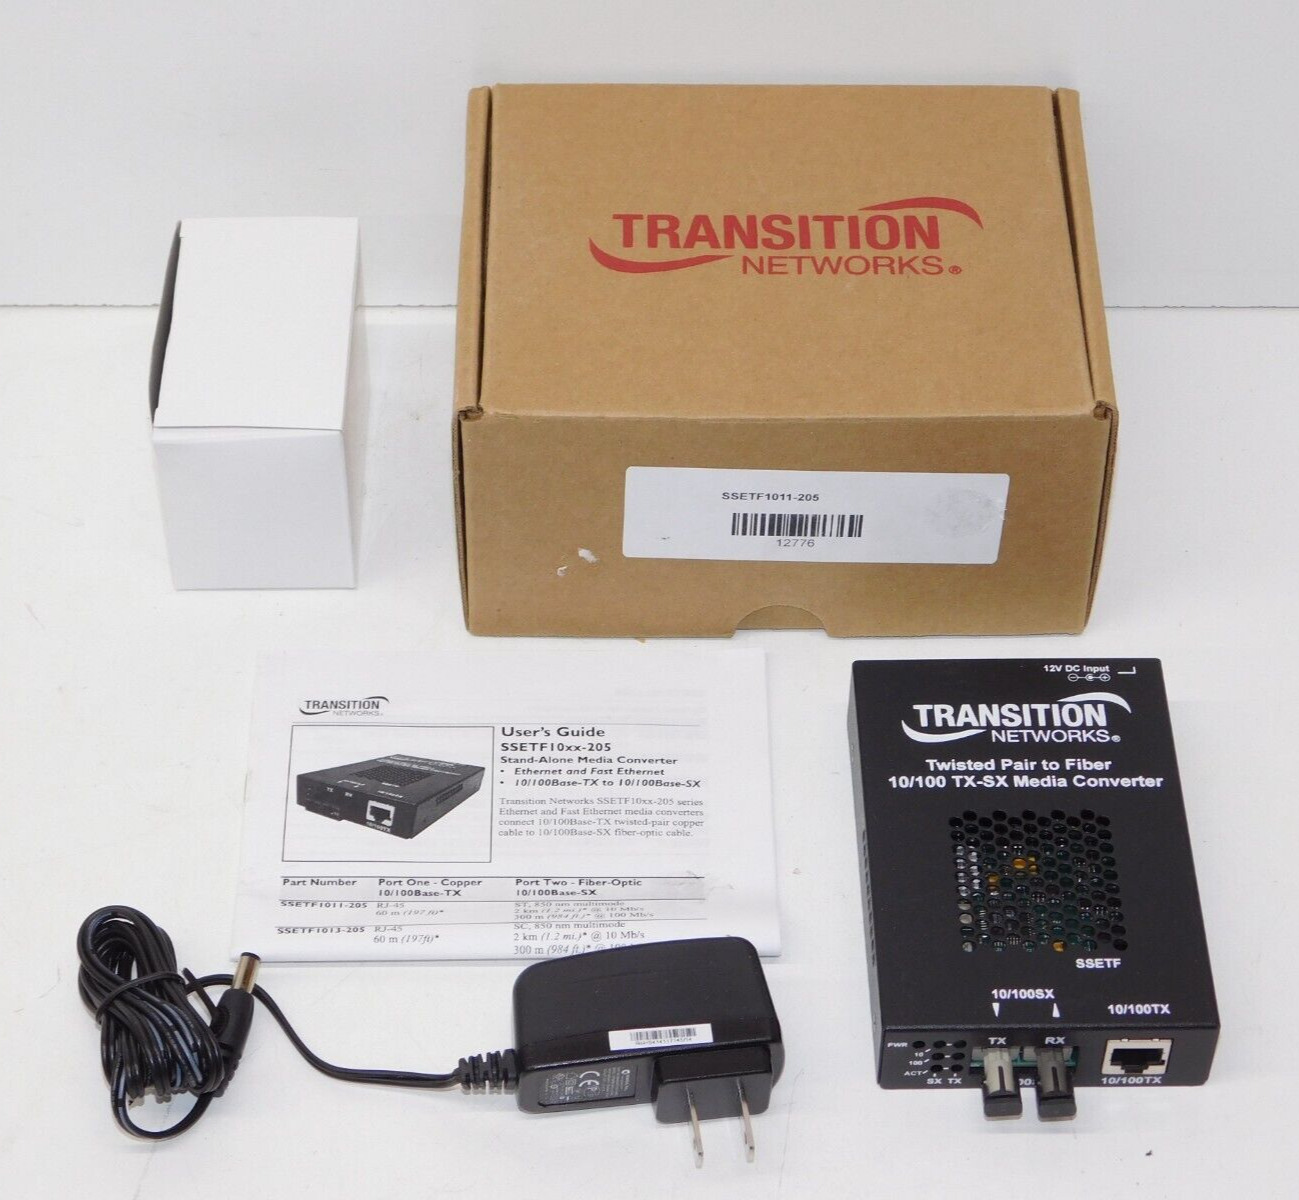 New Transition Networks Twisted Pair Fiber 10/100 TX-SX Media Converter Module